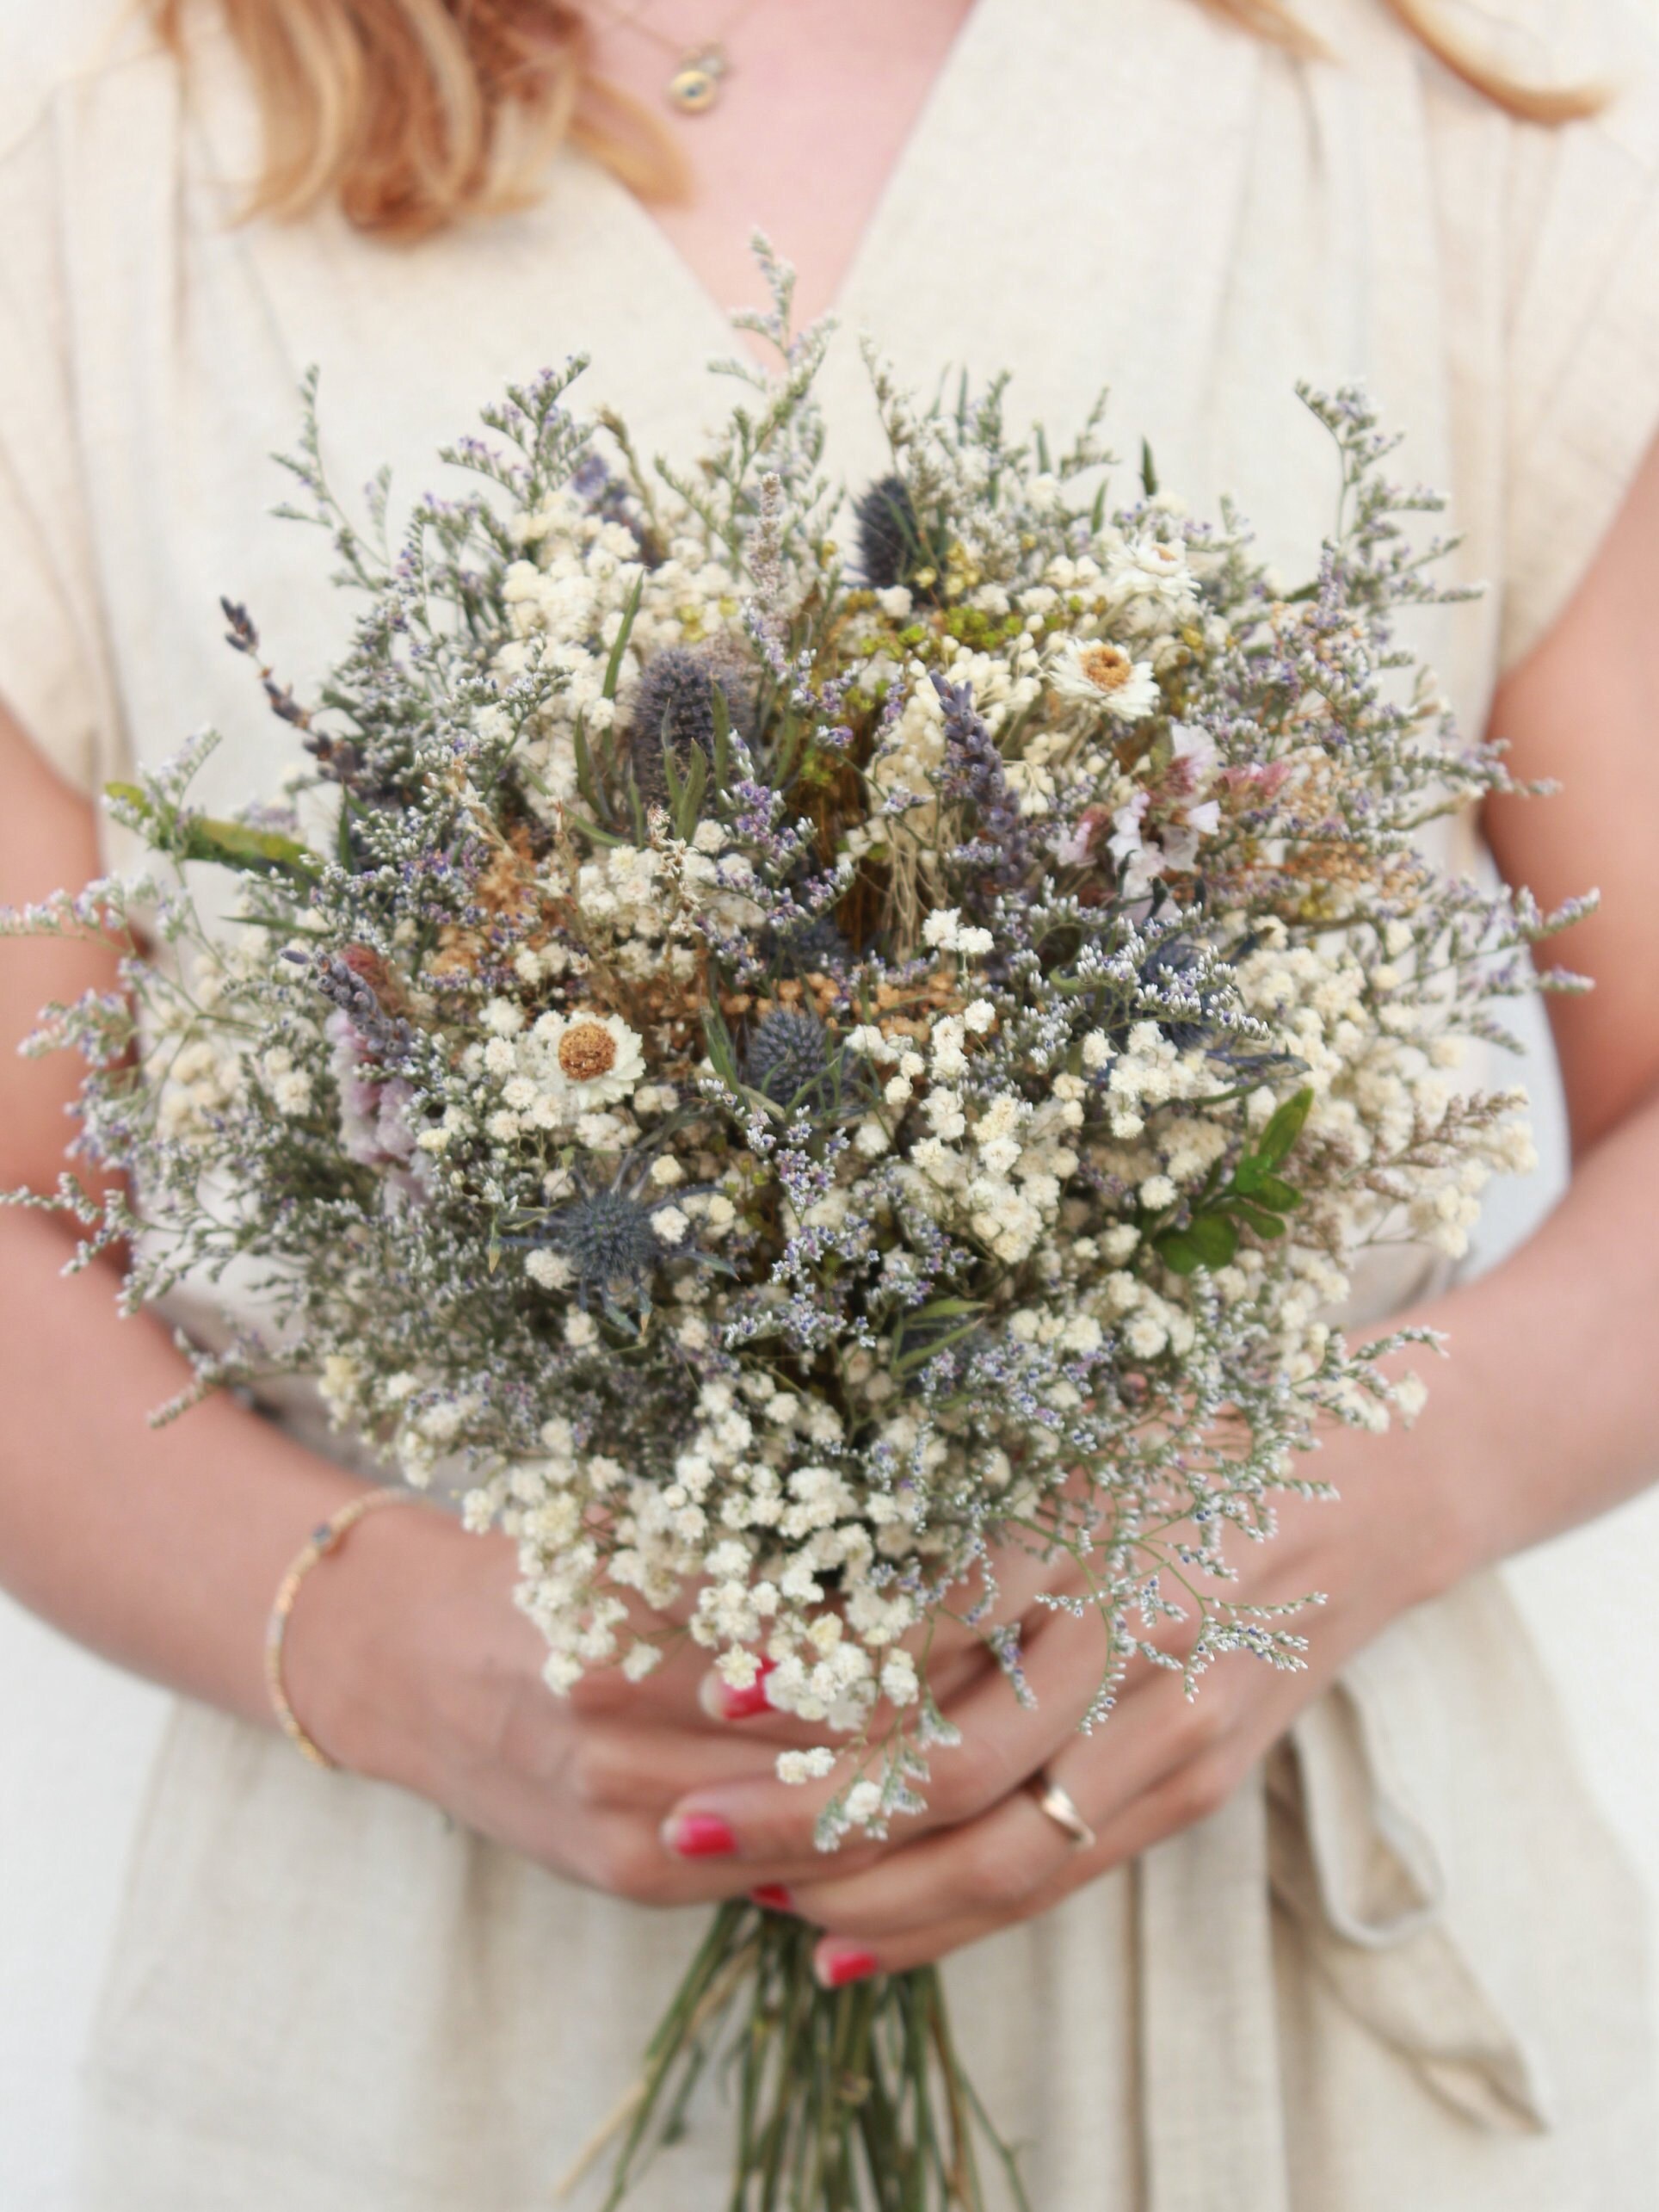 Dried Lavender Bouquet Wedding / Babies Breath Bouquet With Eucalyptus  Leaves / Bridesmaid Bouquet Greenery 